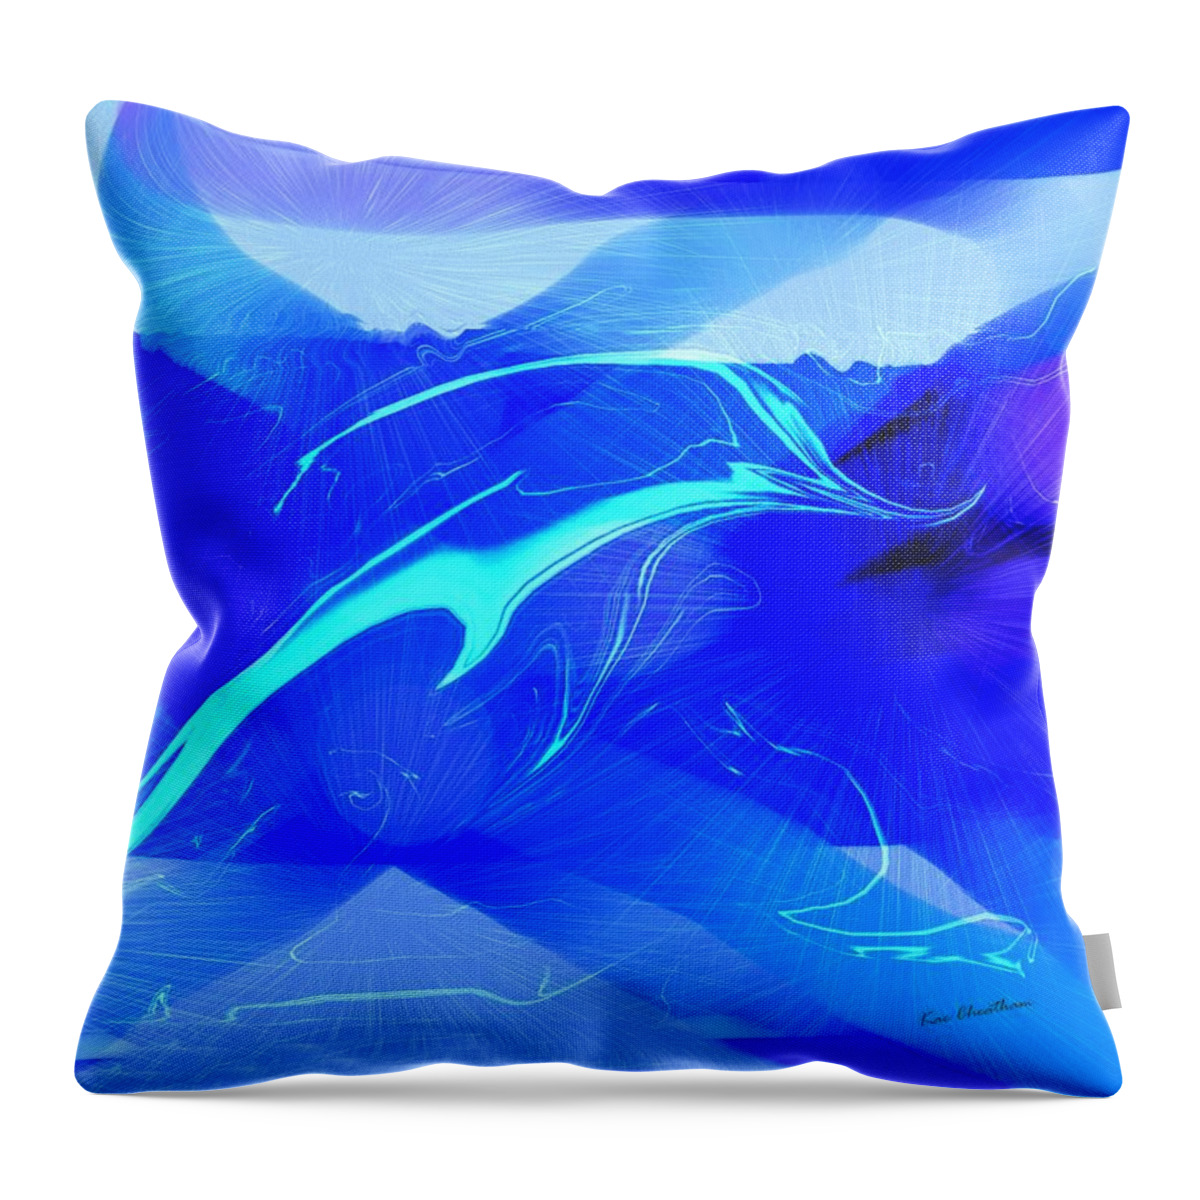 Dolphin Throw Pillow featuring the digital art Dolphin Abstract - 1 by Kae Cheatham